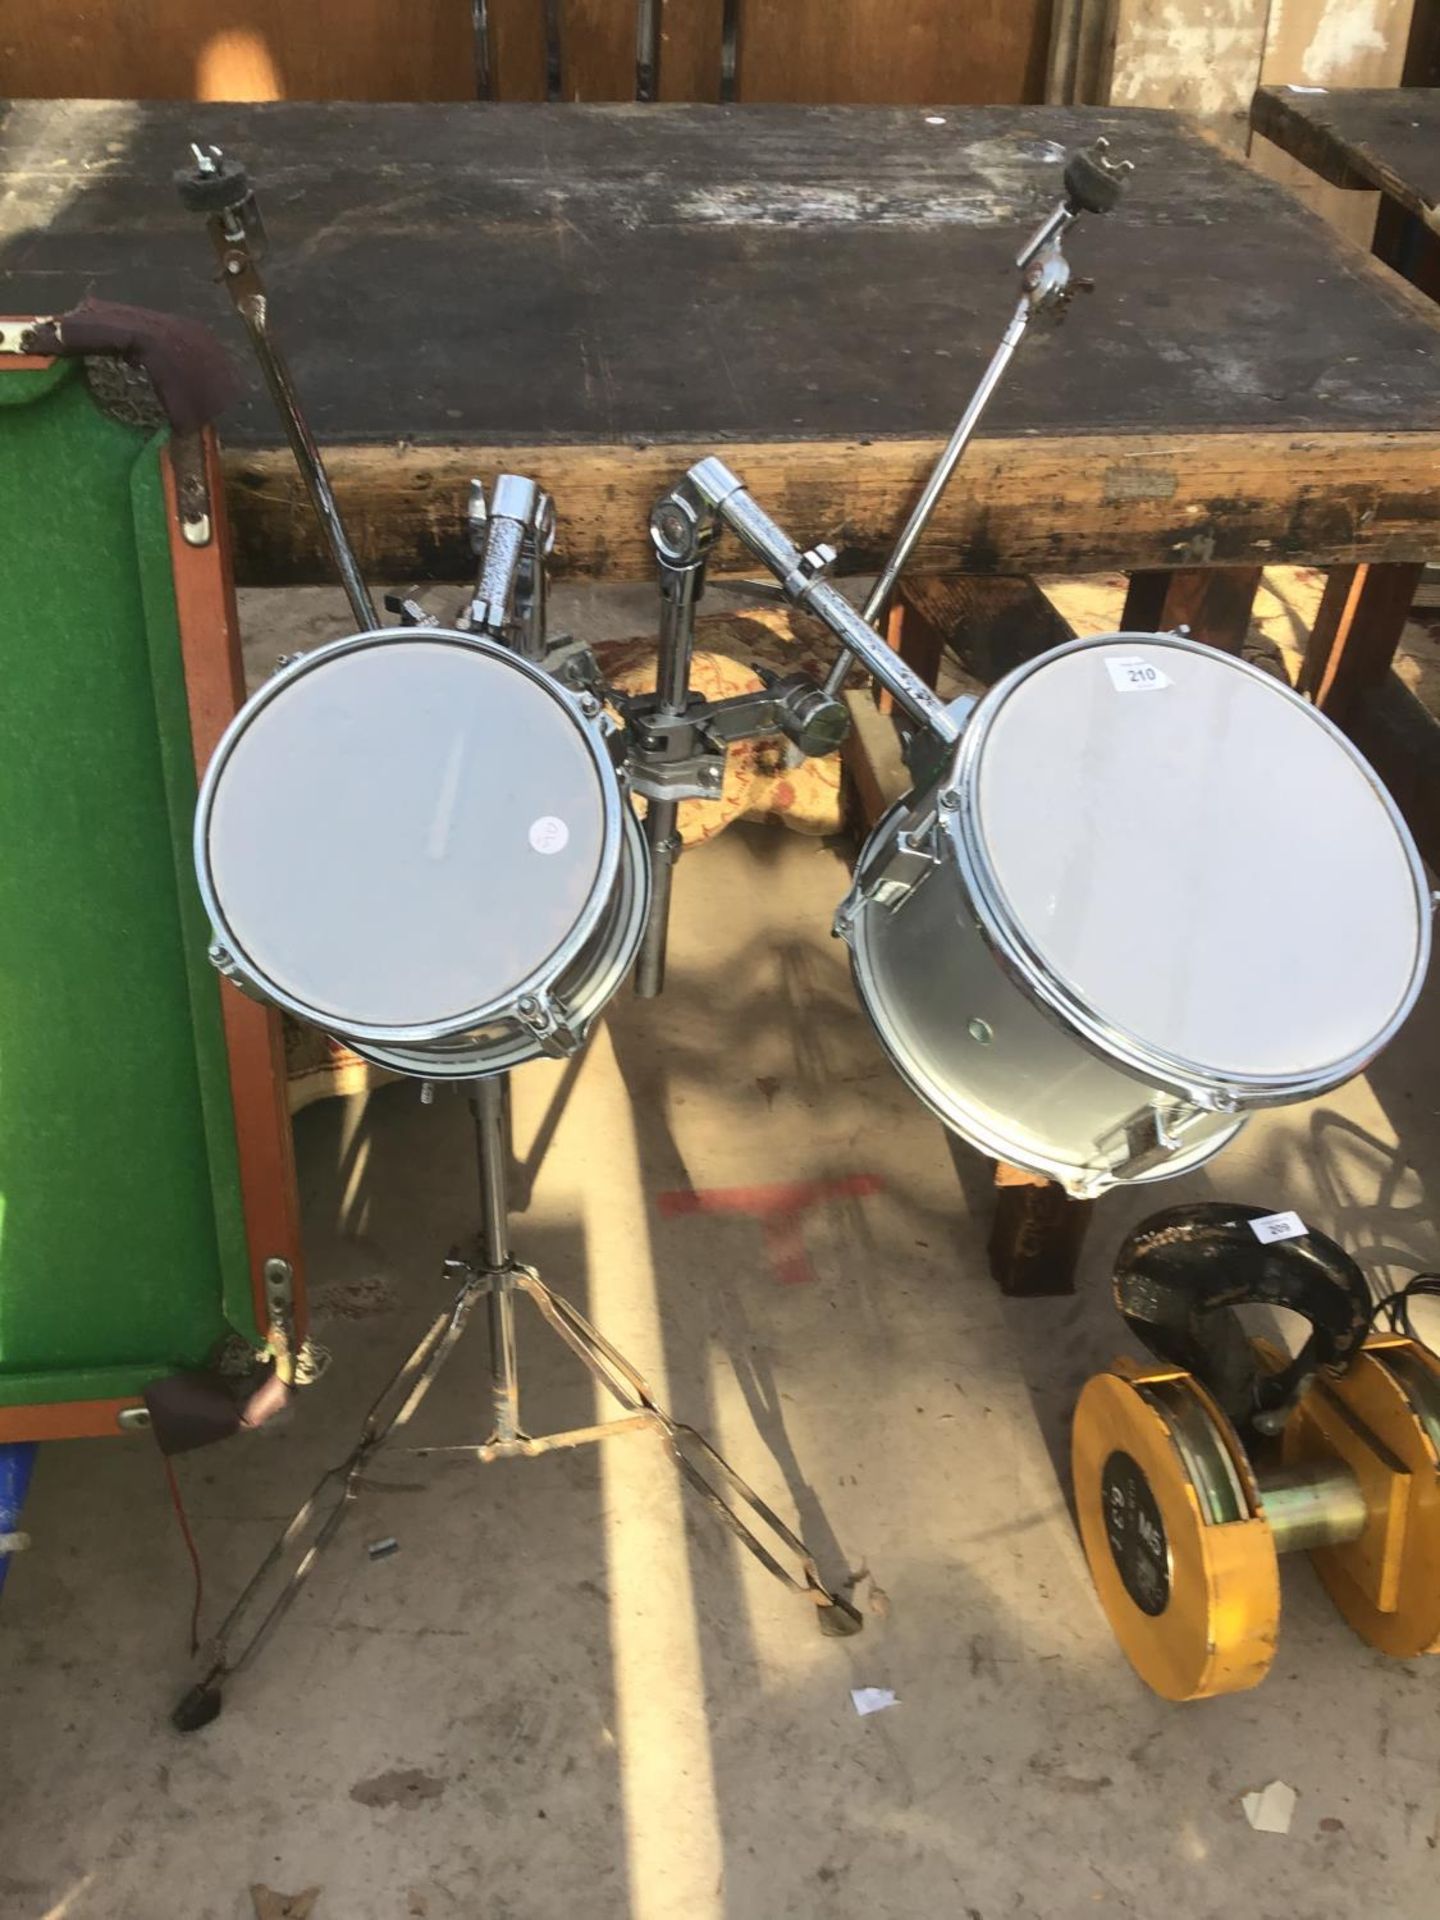 A SET OF DRUMS ON A STAND